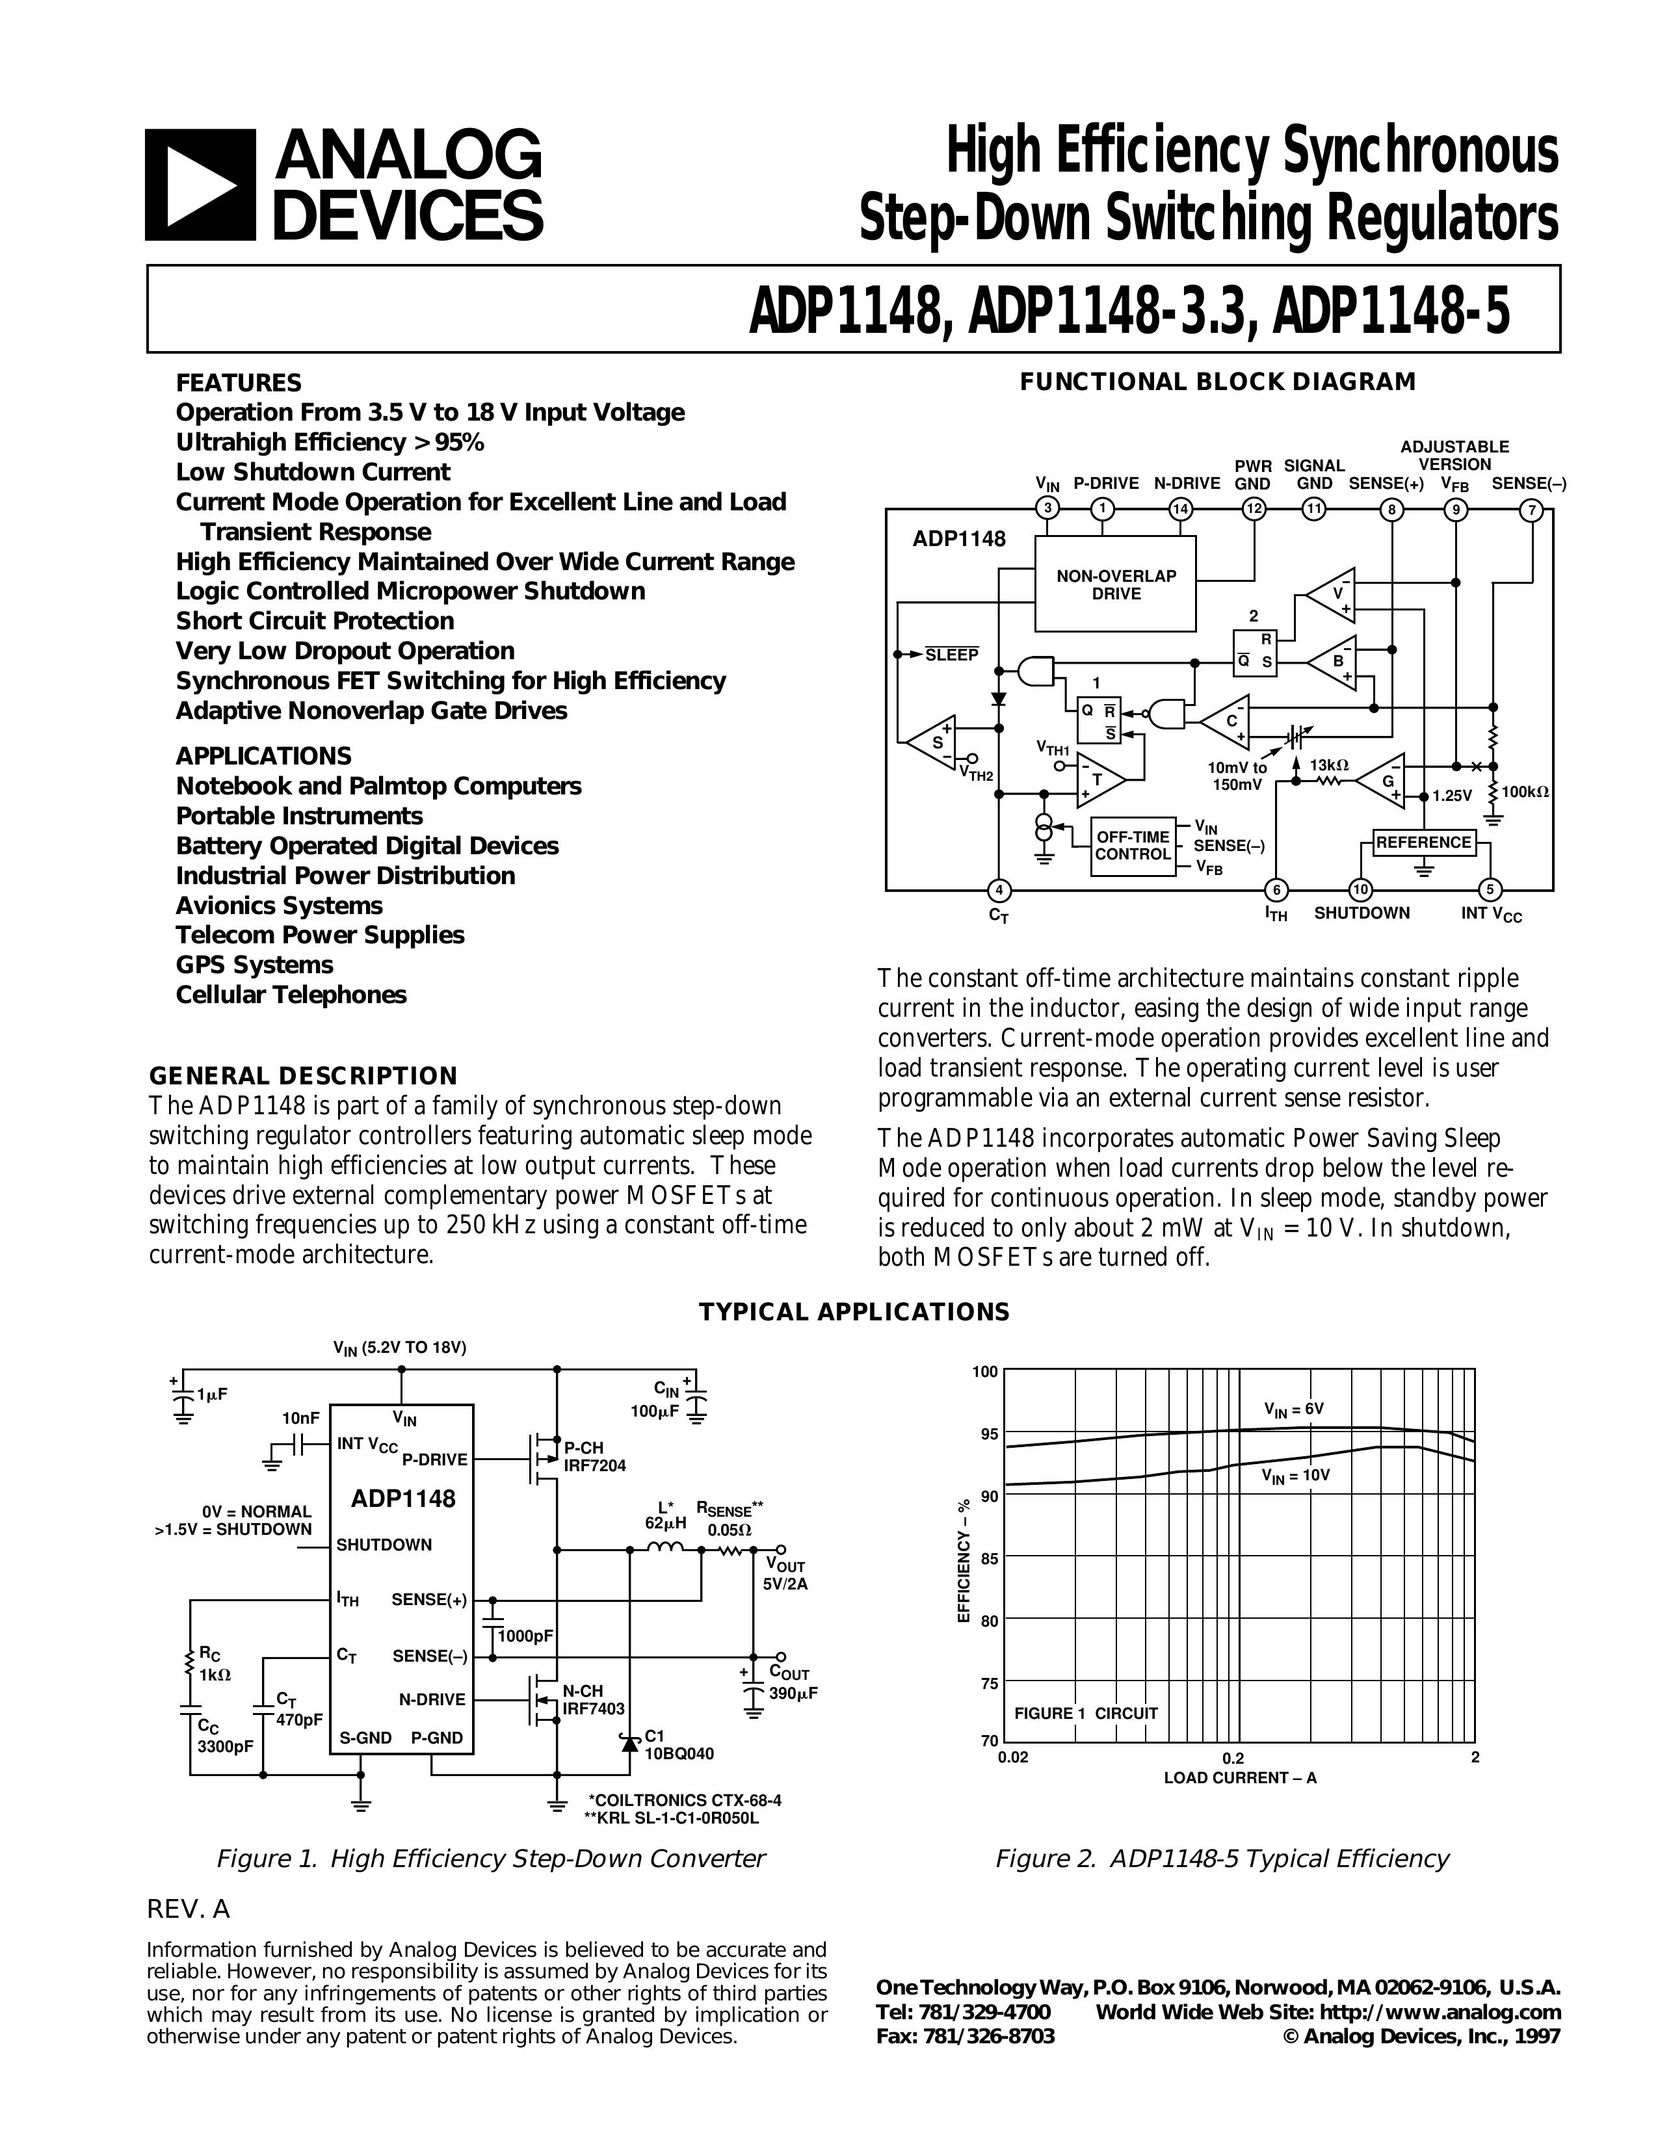 Analog Devices ADP1148-3.3 Clock User Manual